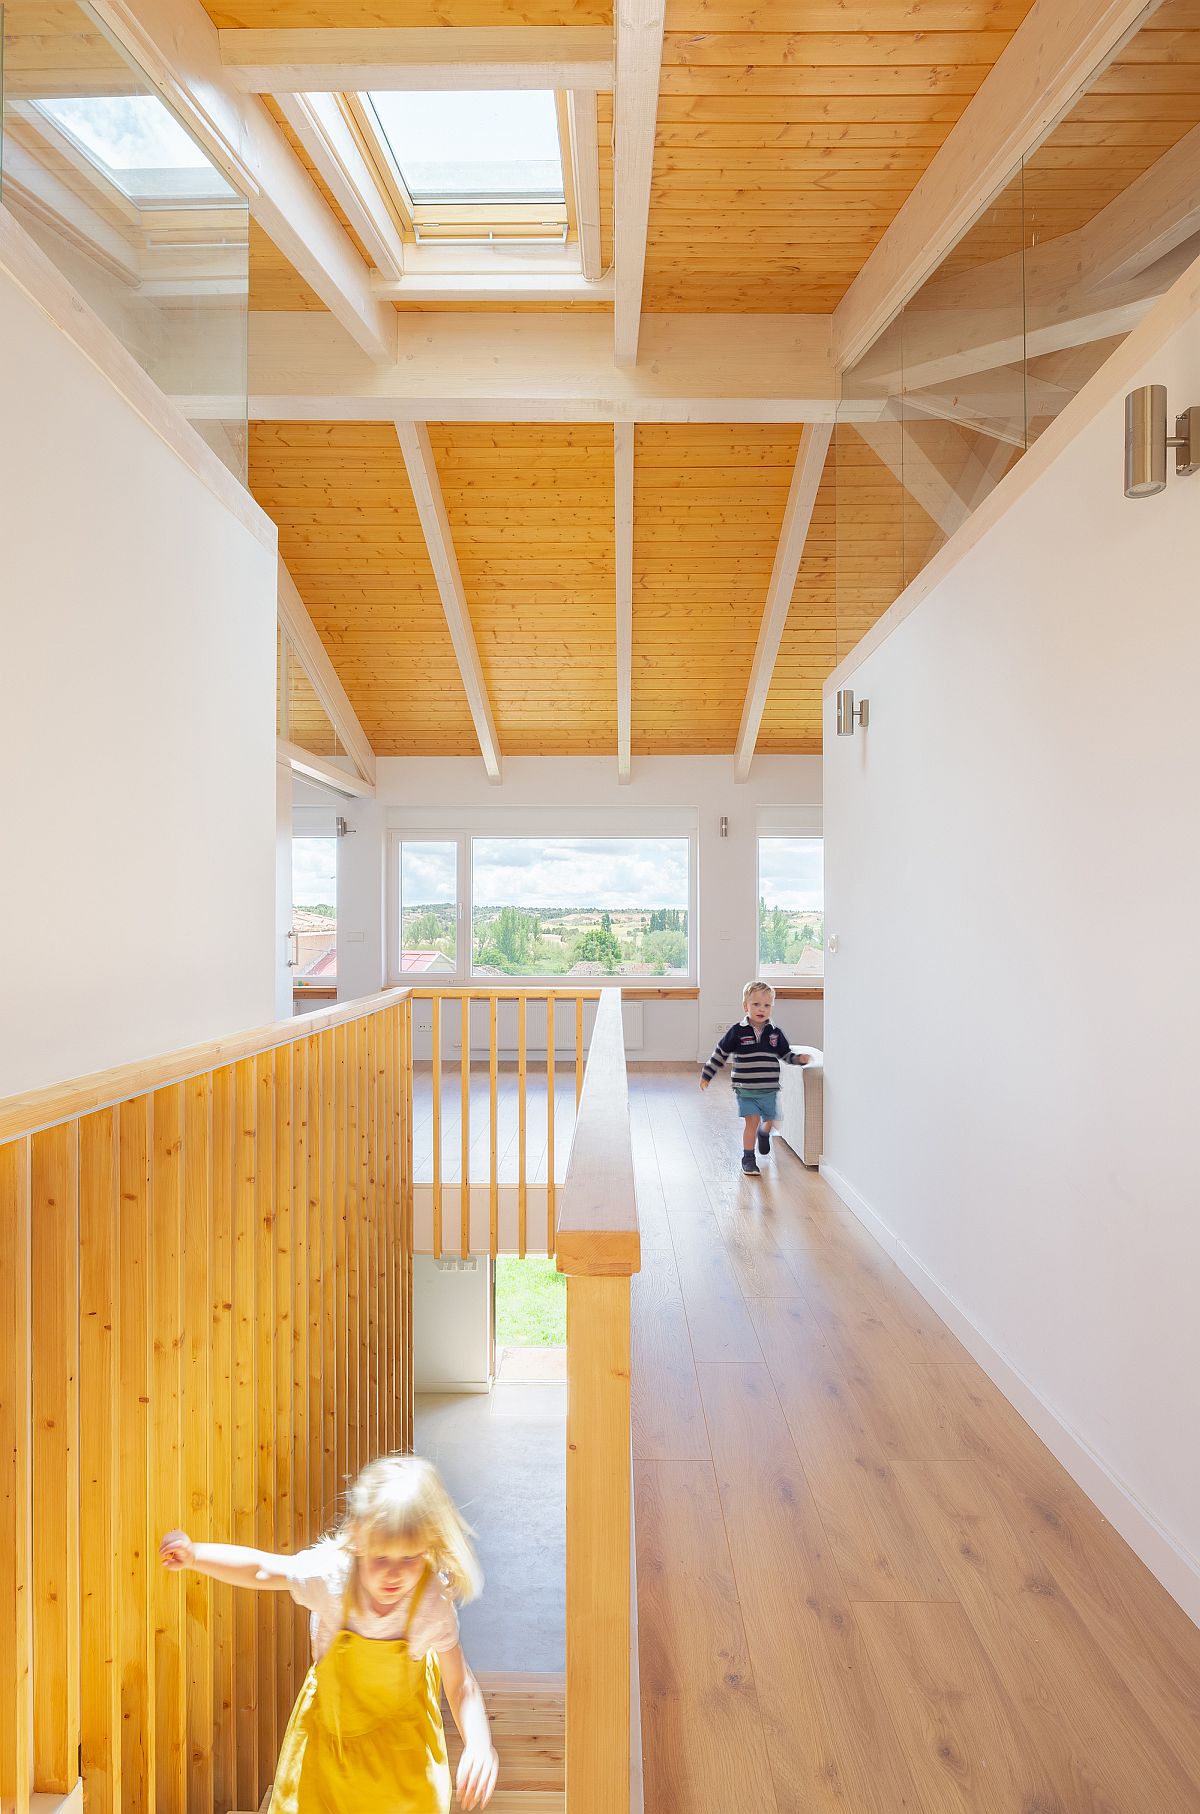 Crisscrossing white ceiling beams give the upper level of the house a unique look